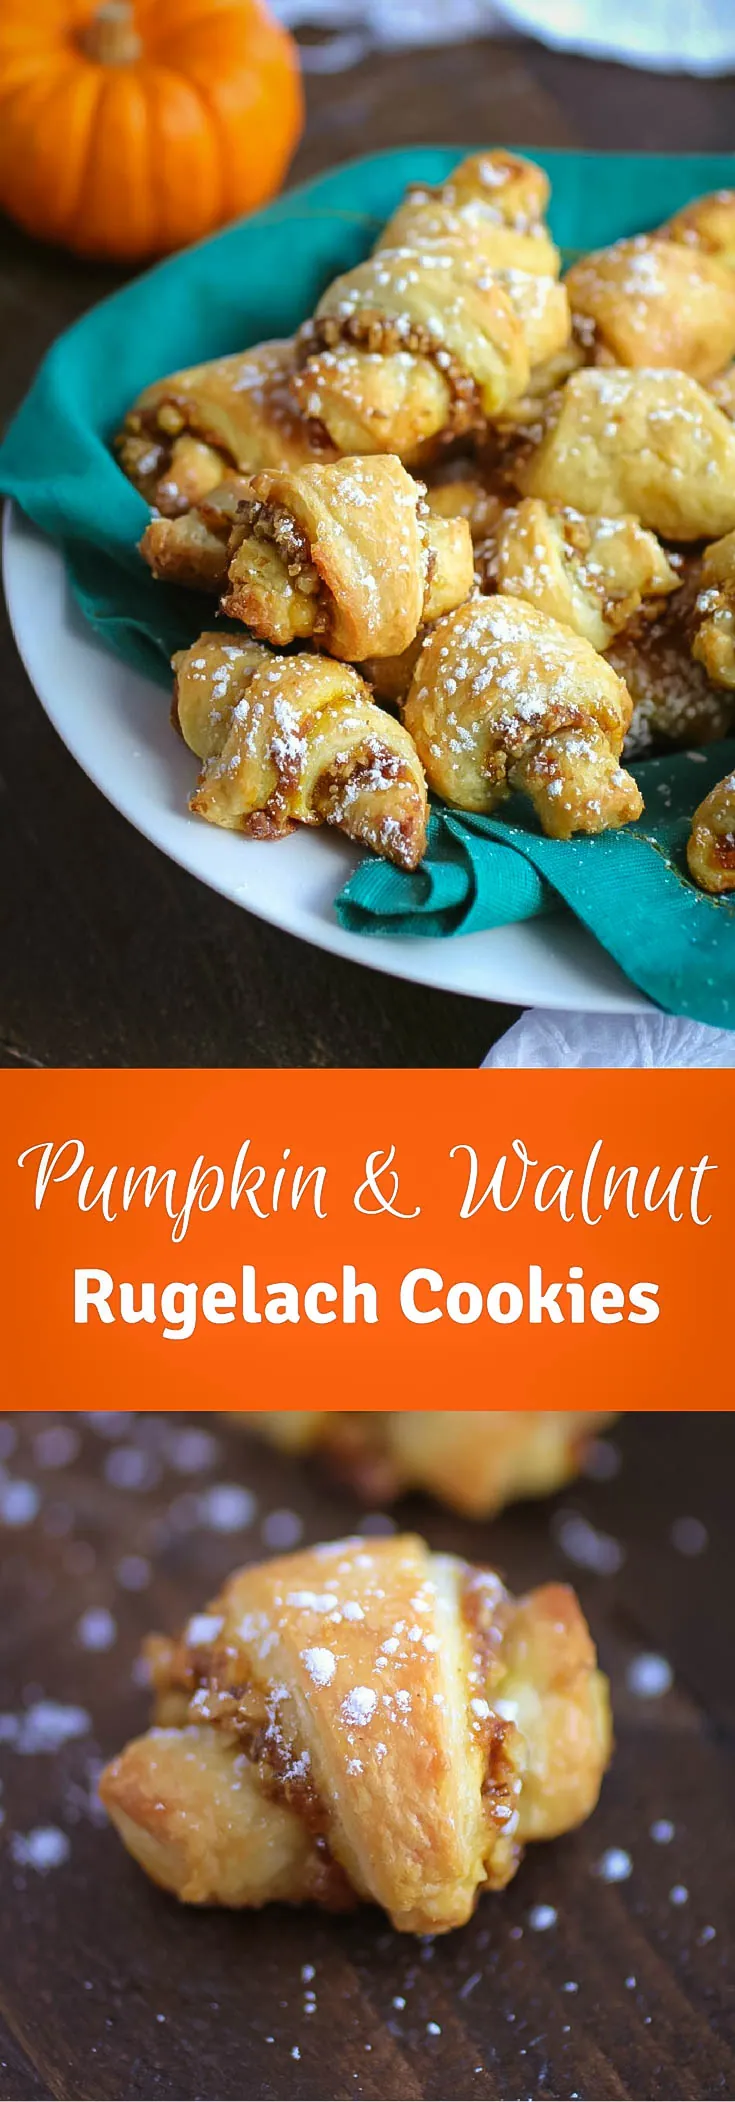 Pumpkin and Walnut Rugelach Cookies are a delight for any celebration! You'll love these Pumpkin and Walnut Rugelach Cookies!